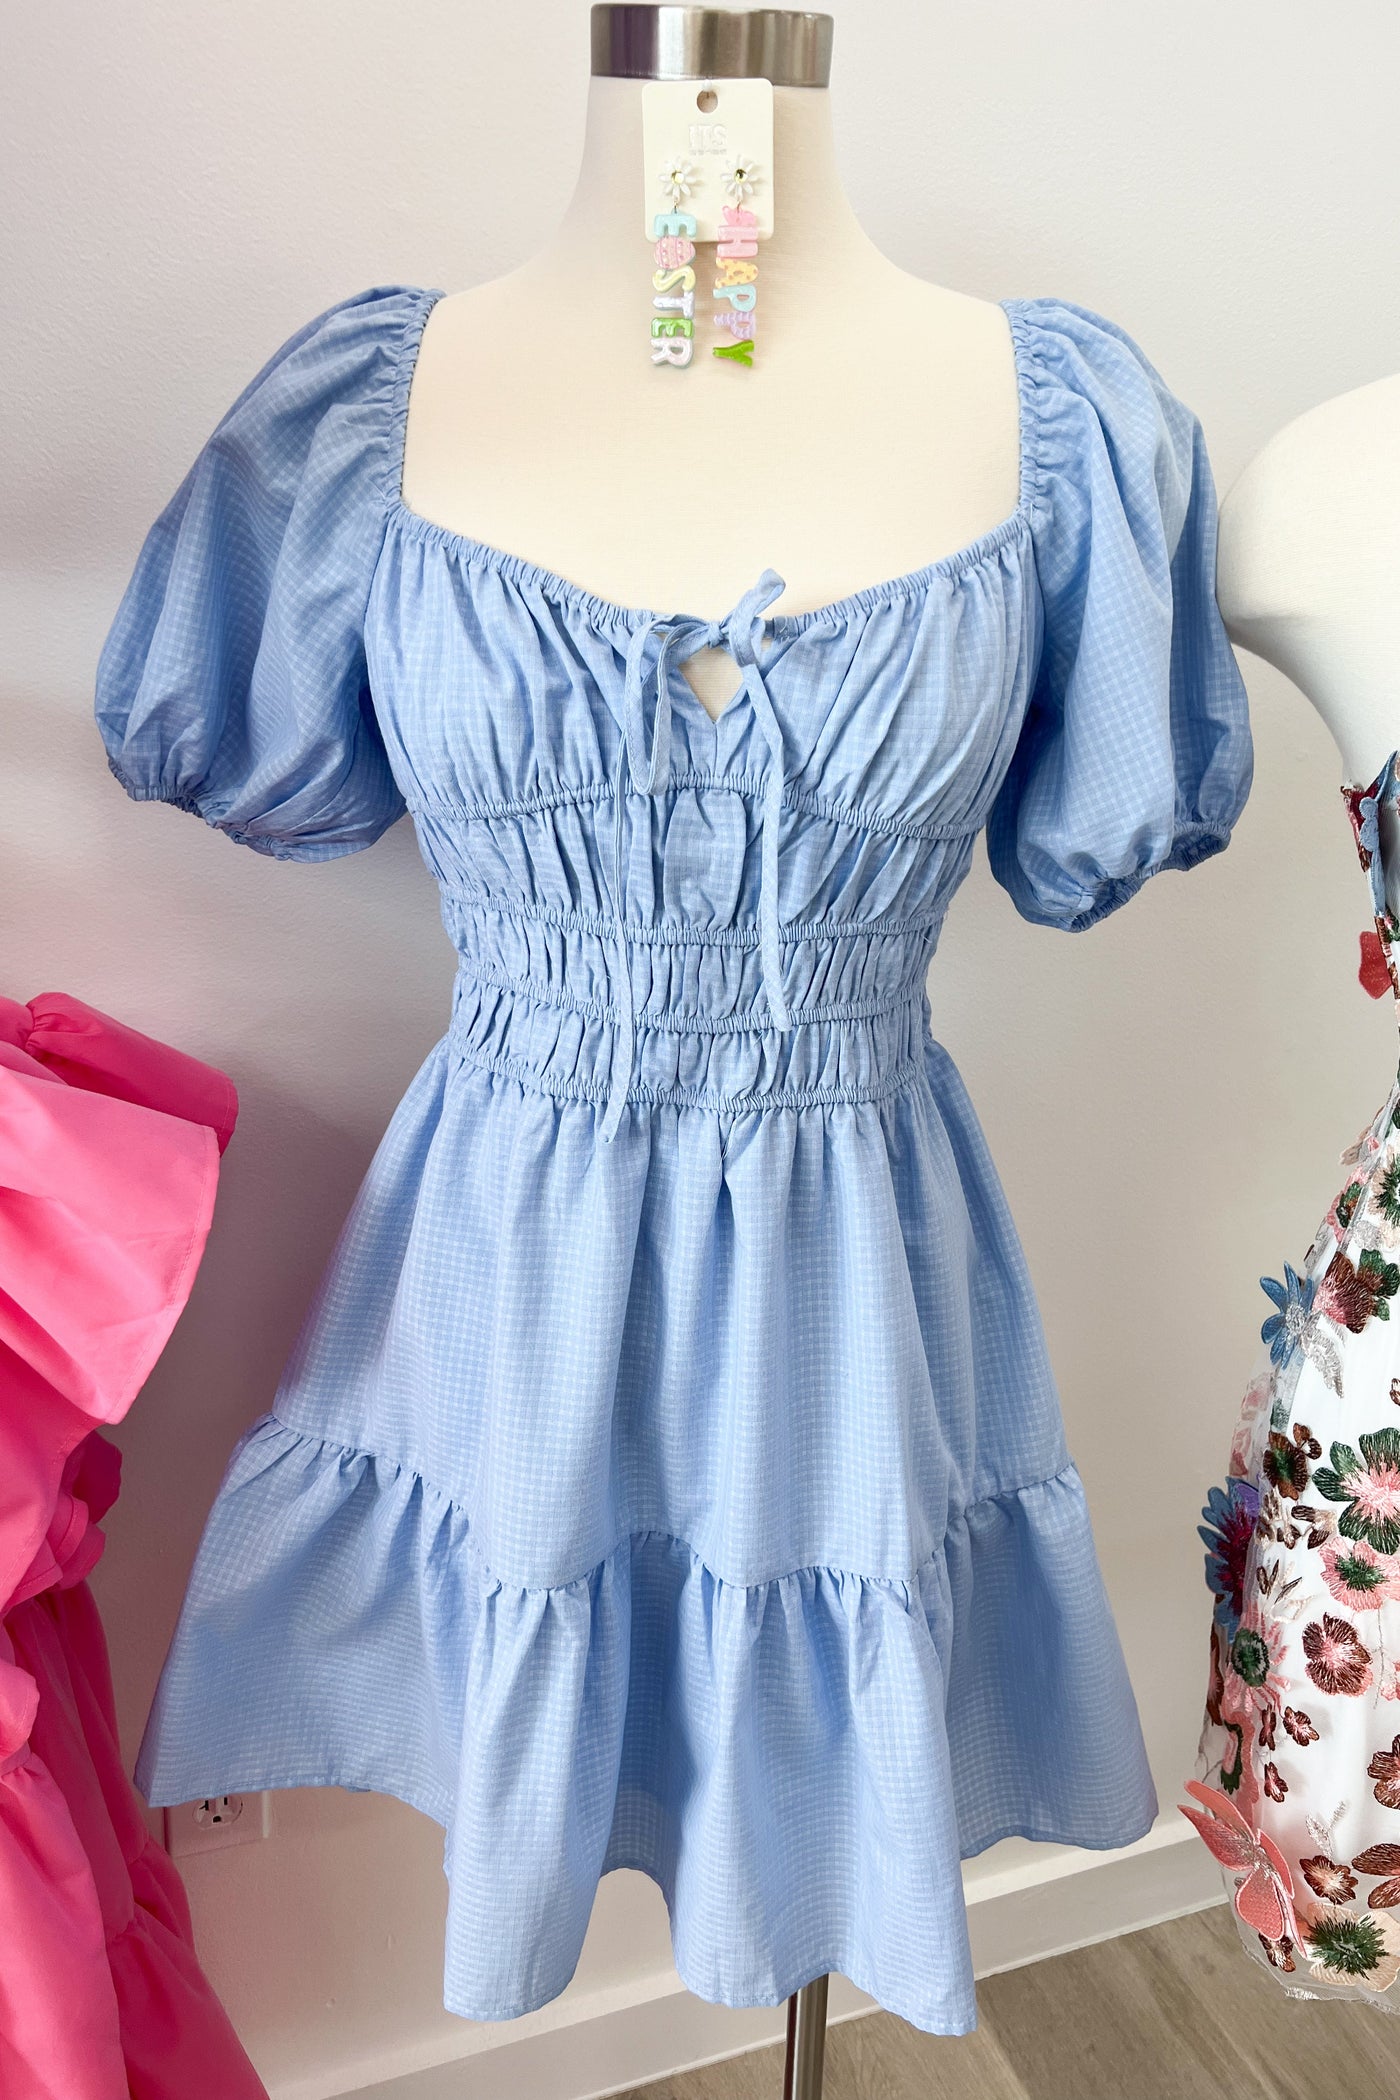 "I Know She Knows" Dress (Blue) - Happily Ever Aften